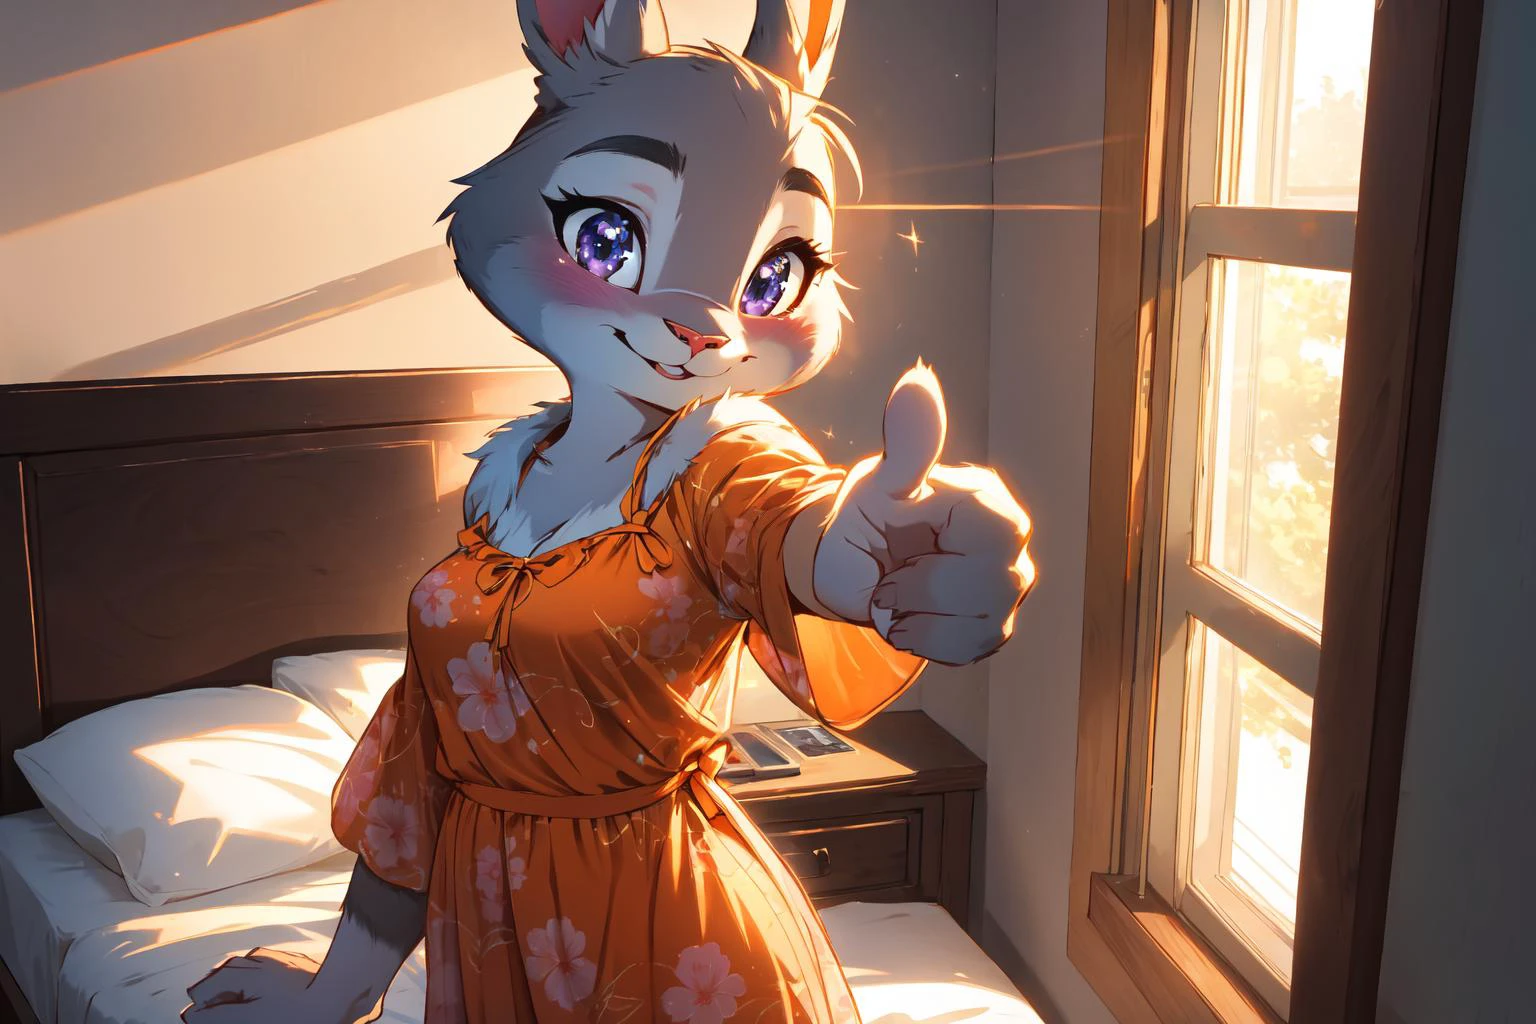 (judyhopps), (ultra detailed fur:1.2), rabbit ears,
seductive smile, hanging breasts, (hope on face),
(cute orange nightgown:1.2),
bedroom, standing near bed, relaxed pose, (blushing:1.2)
(pointing viewer with hand), (pointing herself with hand),
(evening:1.2), windows, english countryside, spring,
(masterpiece:1.2), (best quality:1.2), (intricate:1.2), (highly detailed:1.2), (sharp:1.2), (8k:1.2), (highres:1.2),
cinematic lighting, vivid colors,
 